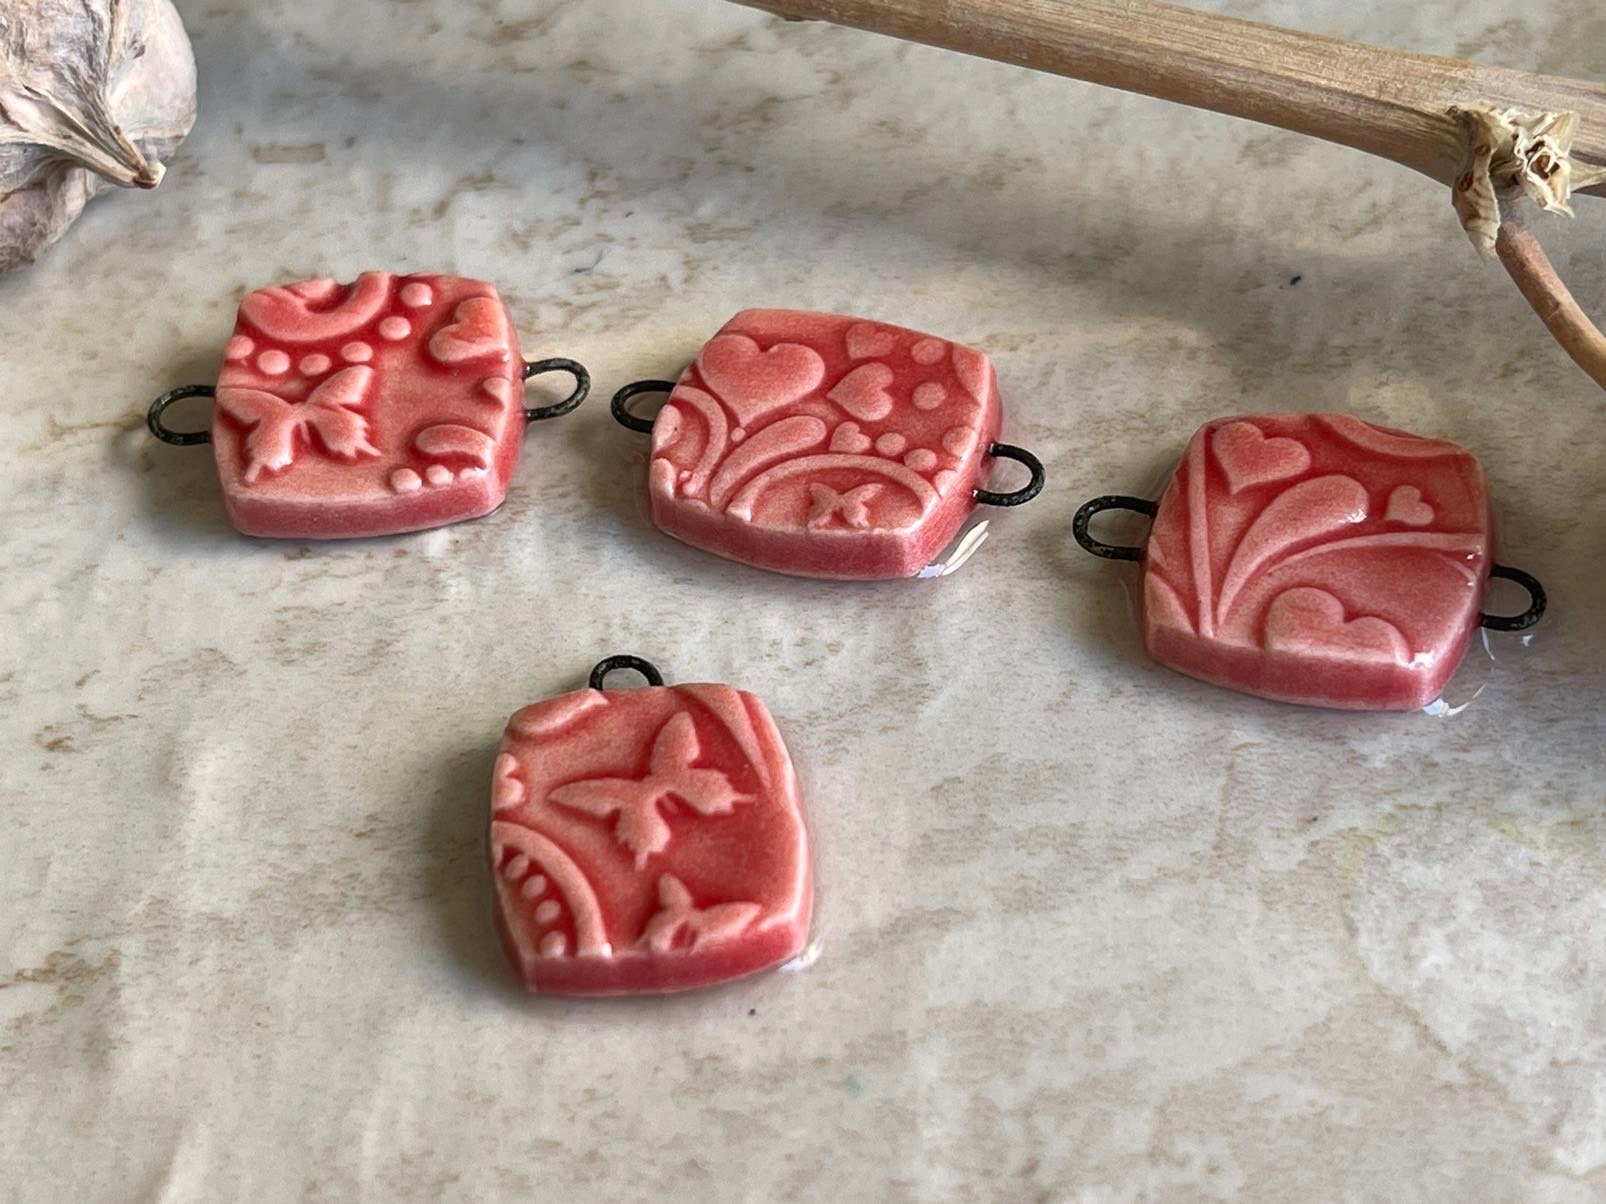 Red Bead Set, Porcelain Beads, Hearts and Butterflies Bead Set, Ceramic Charms, Jewelry Making Components, DIY Bracelet